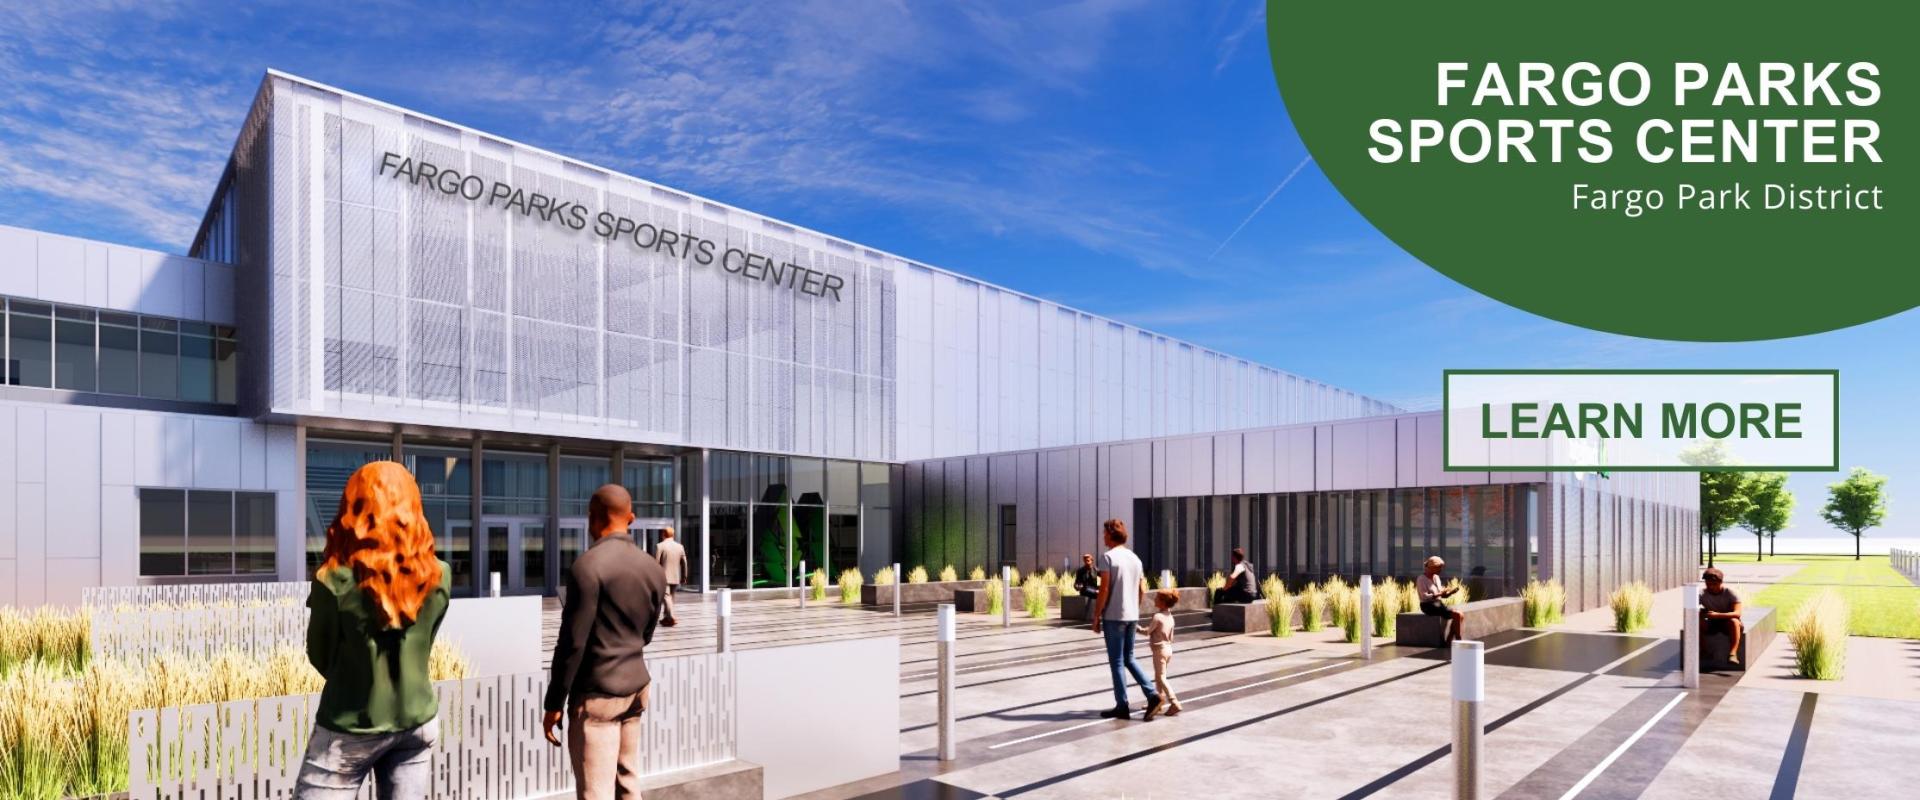 This photo shows a rendition of the Fargo Parks Sports Center with text that says Fargo Parks Sports Center Fargo Park District